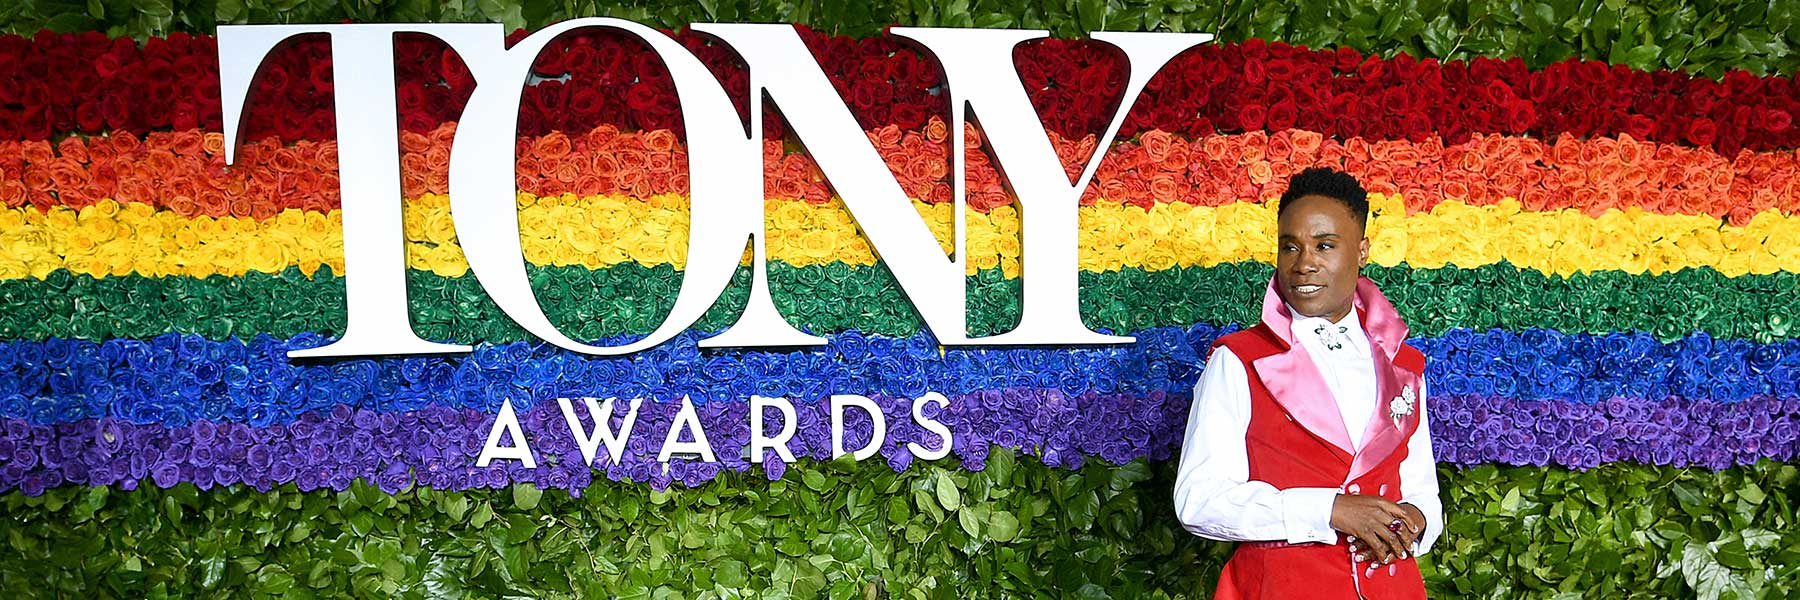 Billy Porter on the red carpet at the Tony Awards.